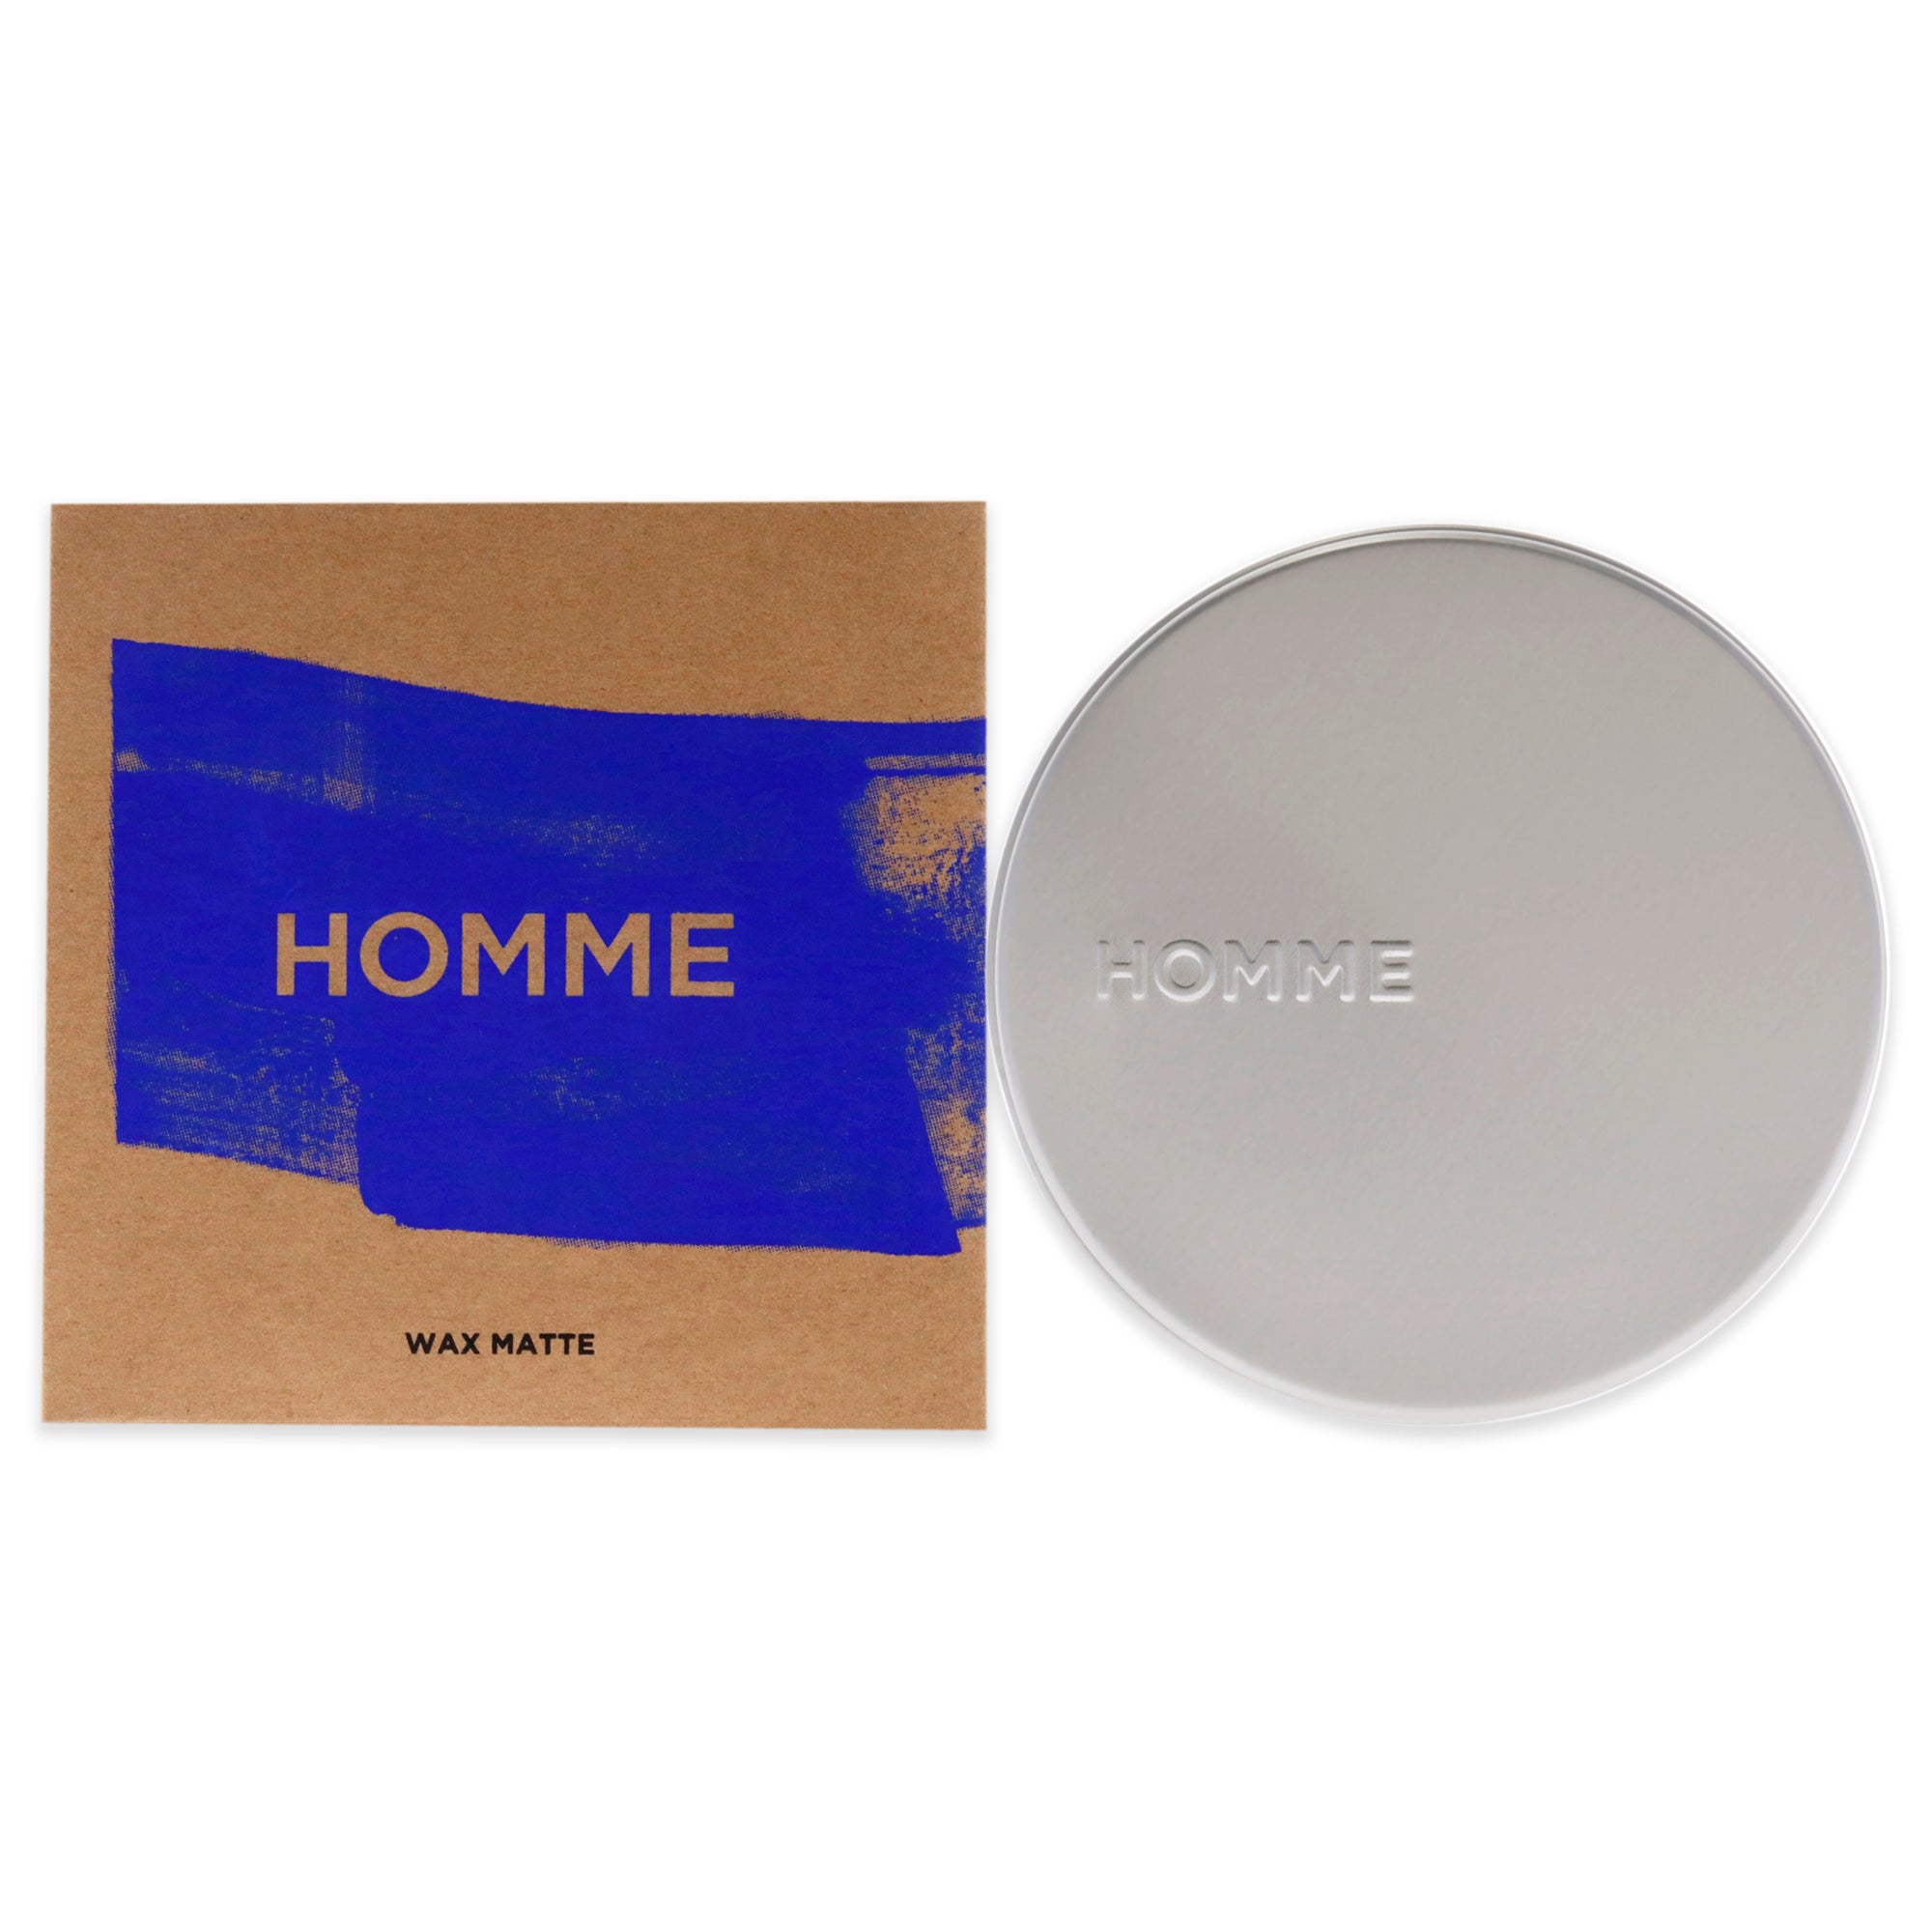 Homme Wax Matte by Homme for Men - 3.4 oz Wax